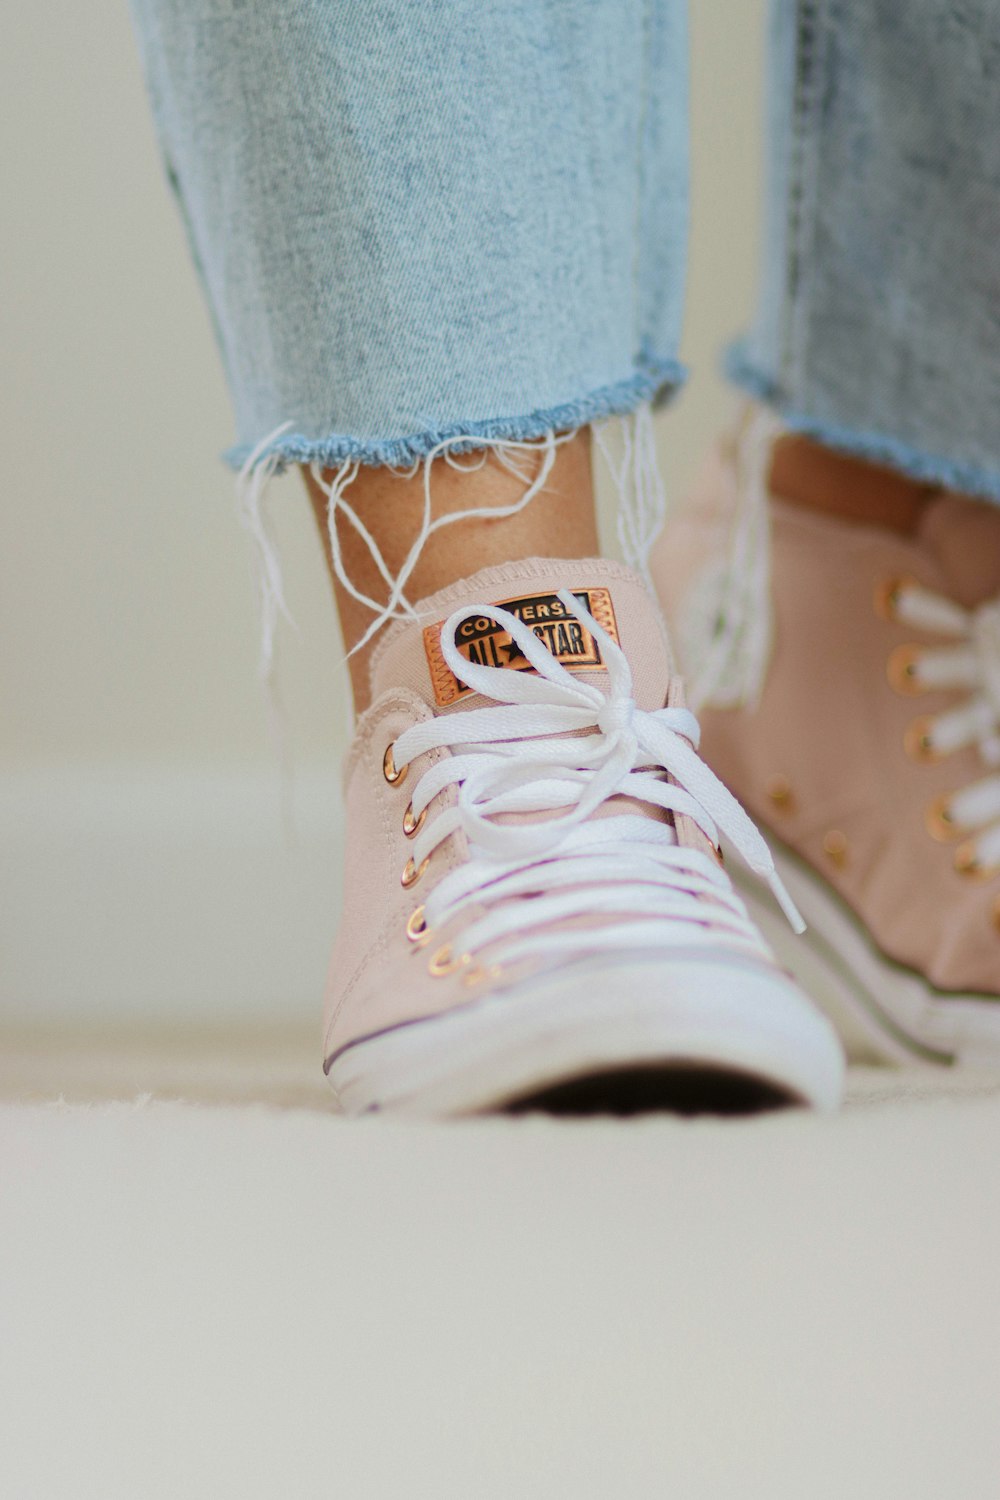 a close up of a person's feet wearing pink sneakers